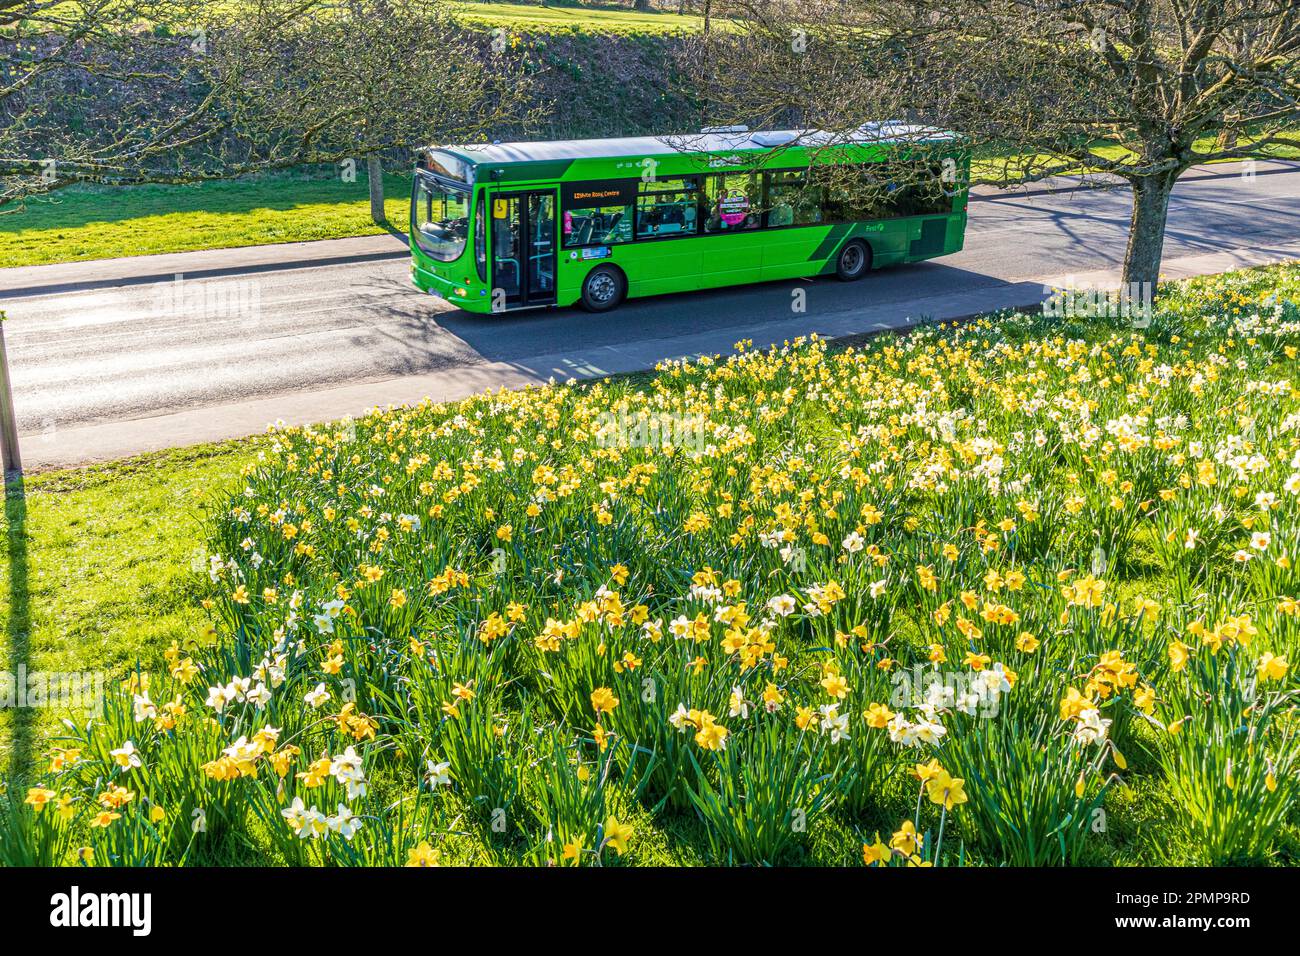 Daffodils in spring beside a road in Roundhay, Leeds, Yorkshire, England UK Stock Photo